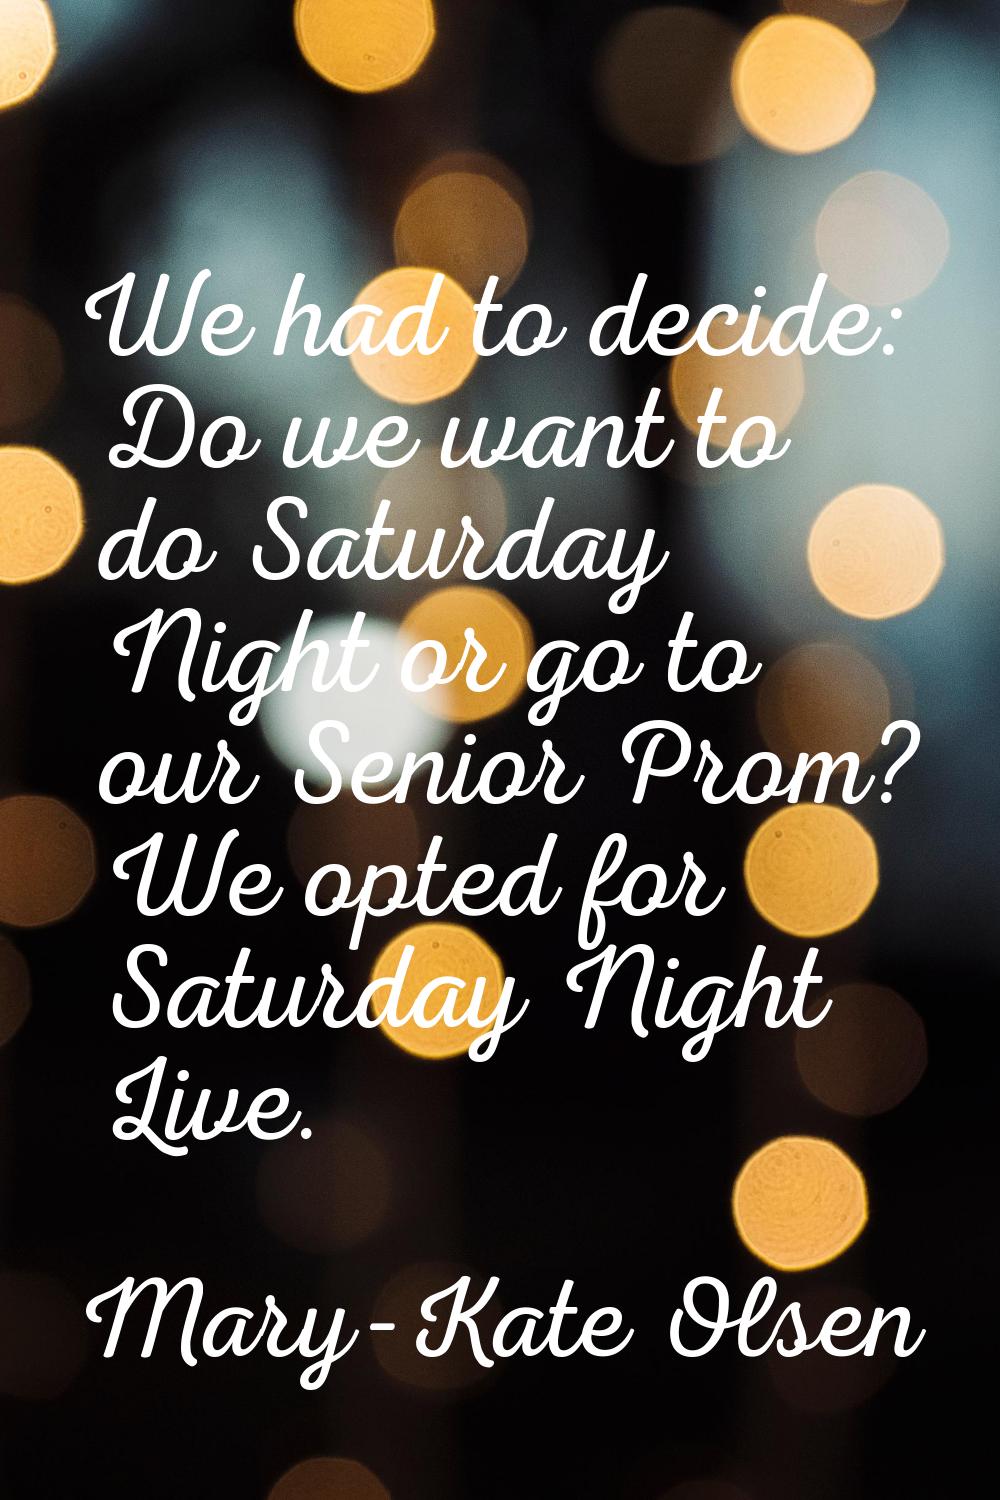 We had to decide: Do we want to do Saturday Night or go to our Senior Prom? We opted for Saturday N